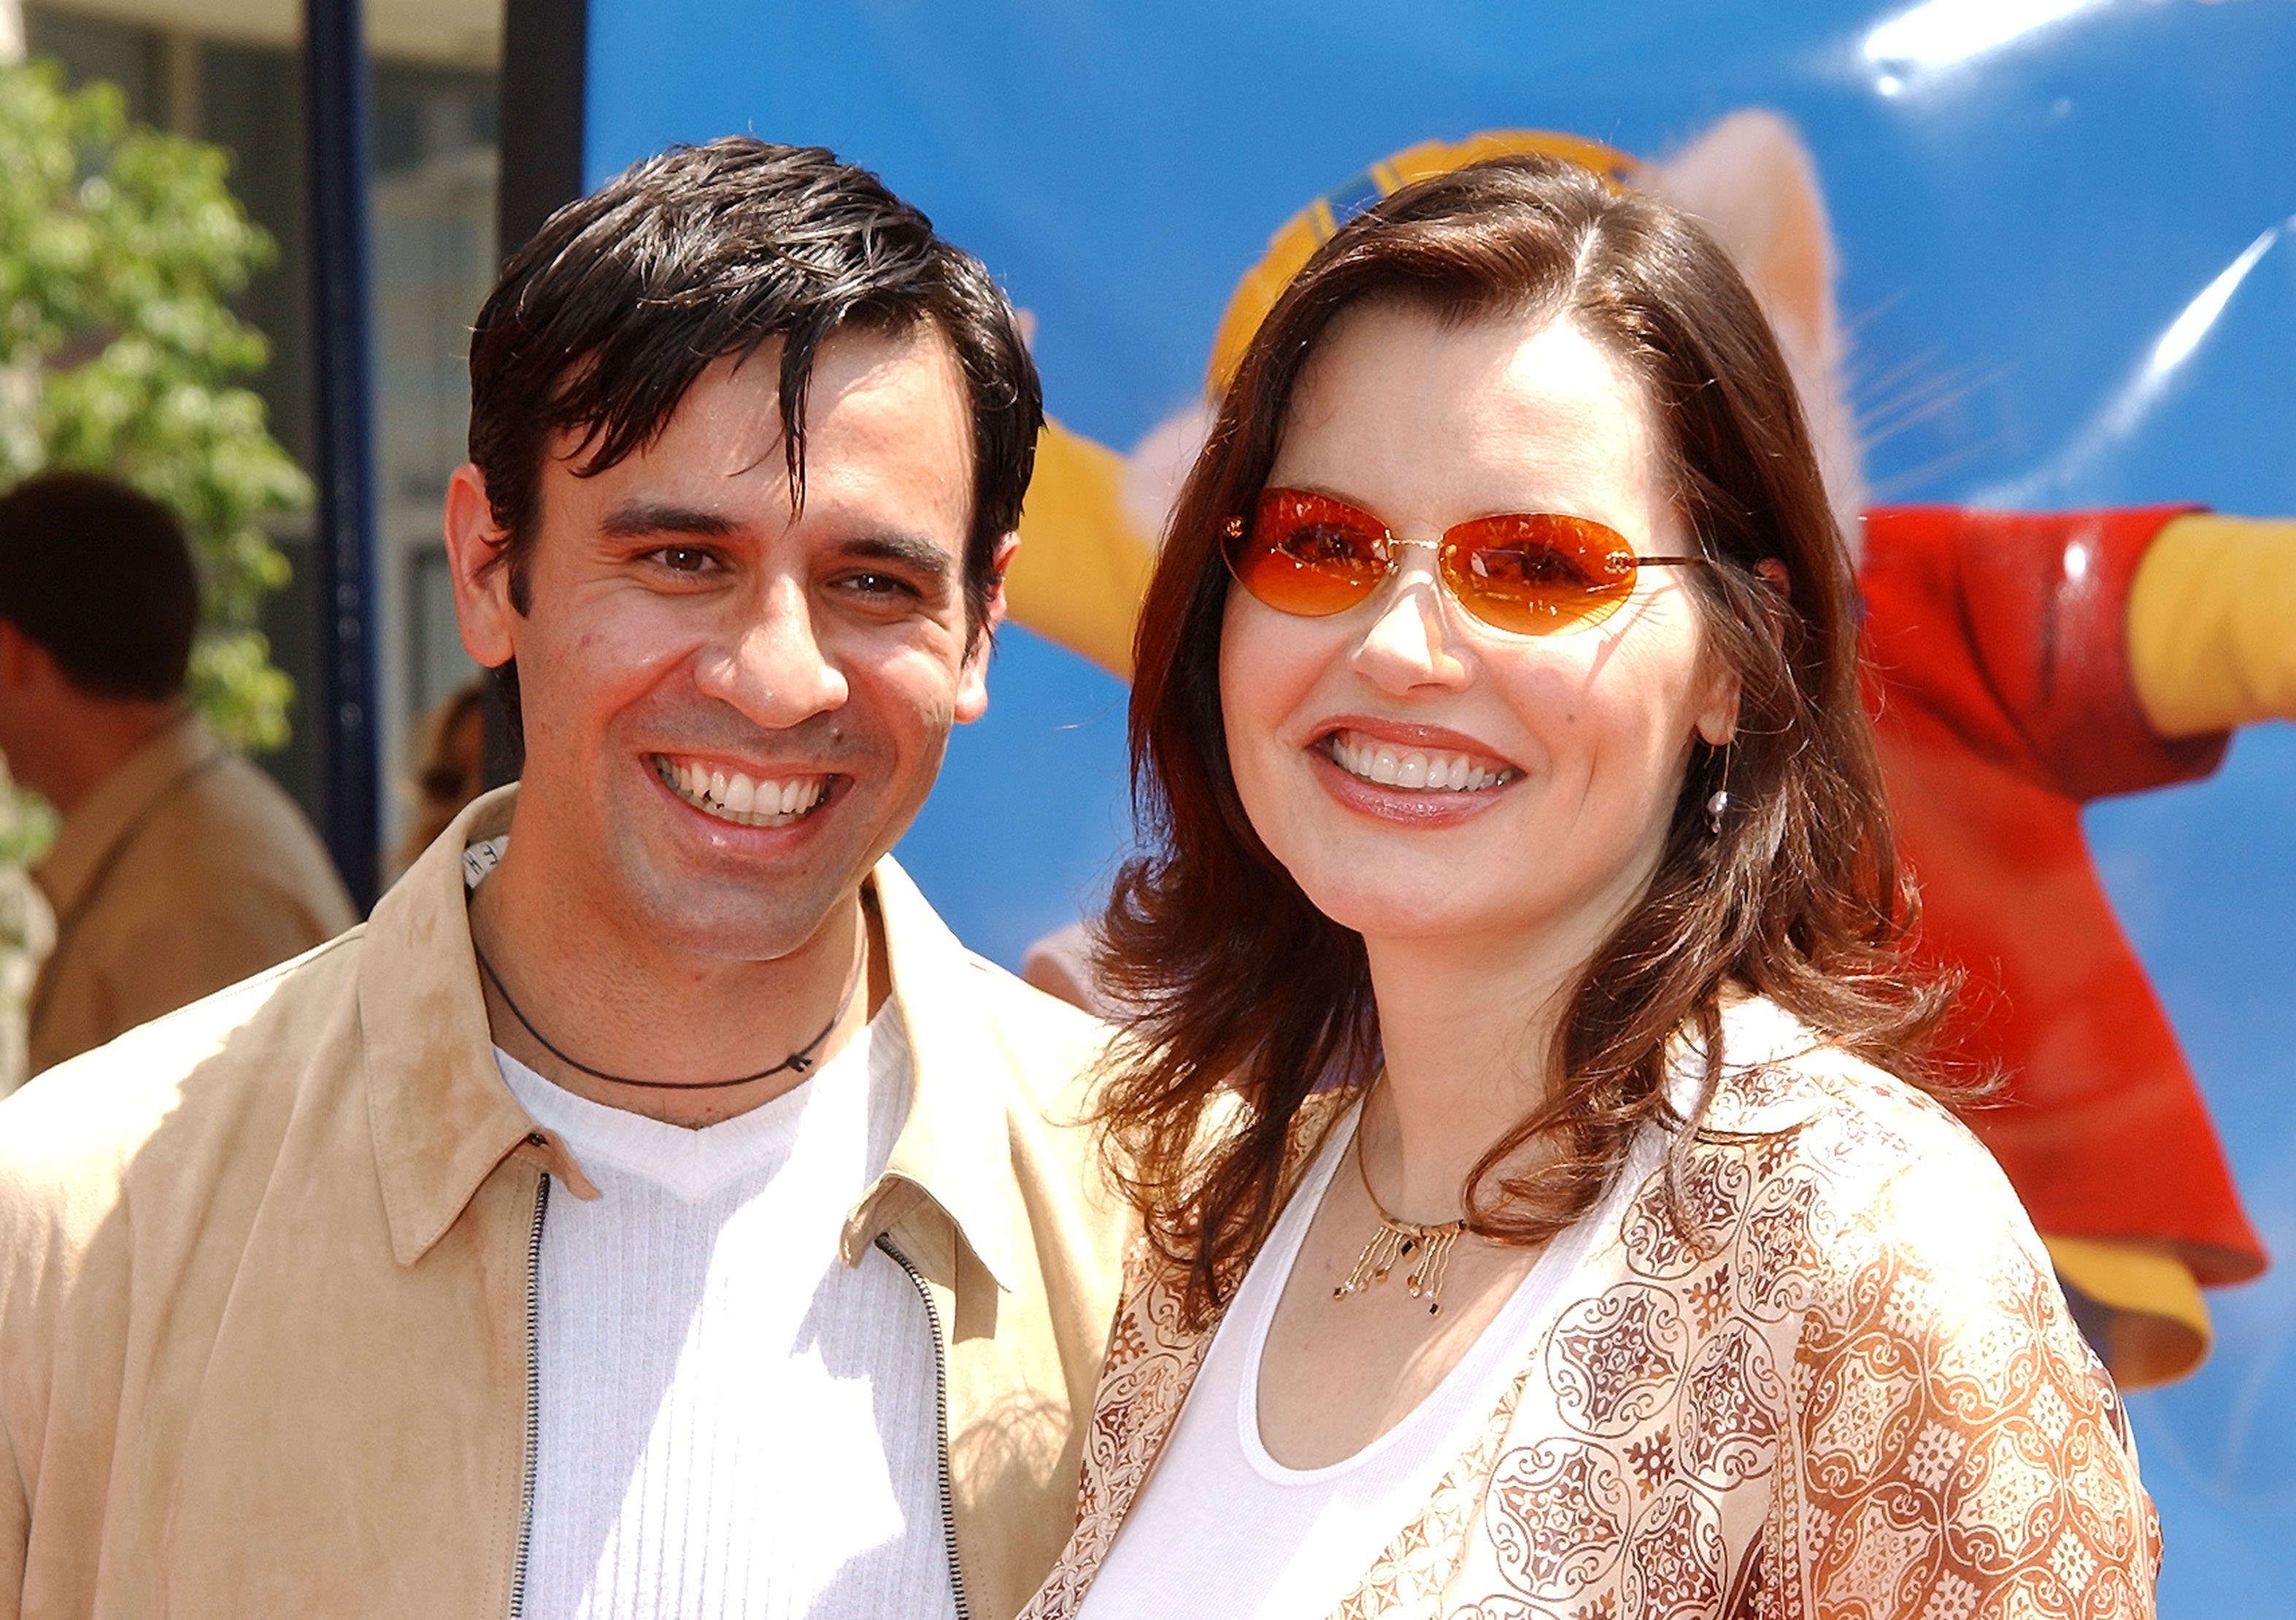 Geena Davis and her husband Reza Jarrahy during "Stuart Small 2" premiered at the Mann Village Theater in Westwood, CA.  / Source: Getty Images